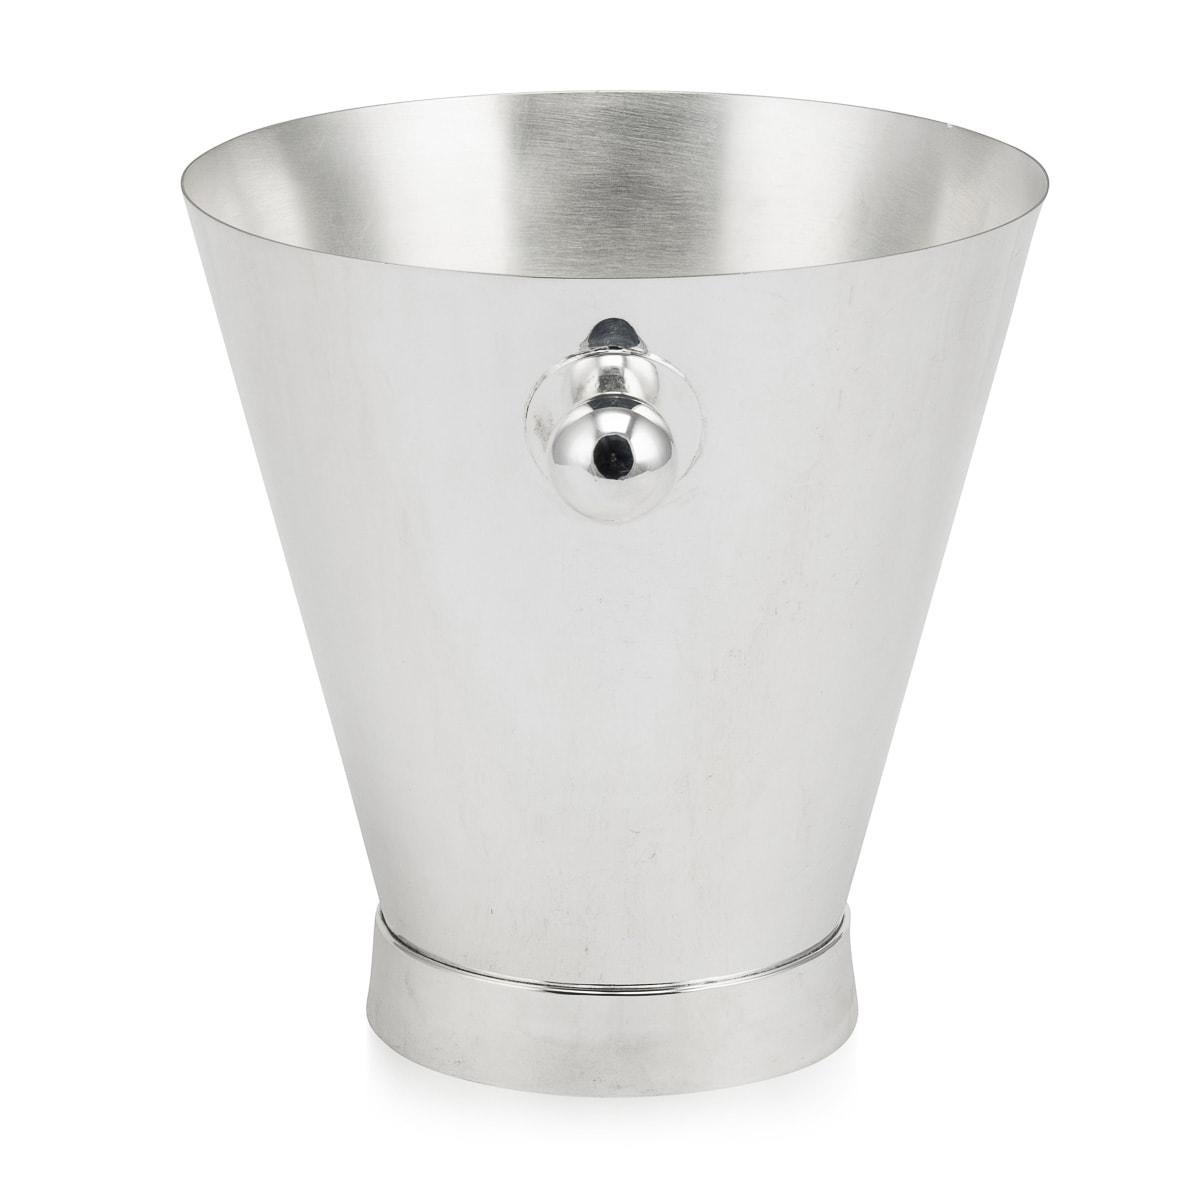 A lovely silver-plated Art Deco wine cooler or champagne bucket with a delightful tapered shape and ball handles, evoking the timeless elegance of the 1940s or 50s. Impeccably restored to its original glory, this champagne bucket bears the